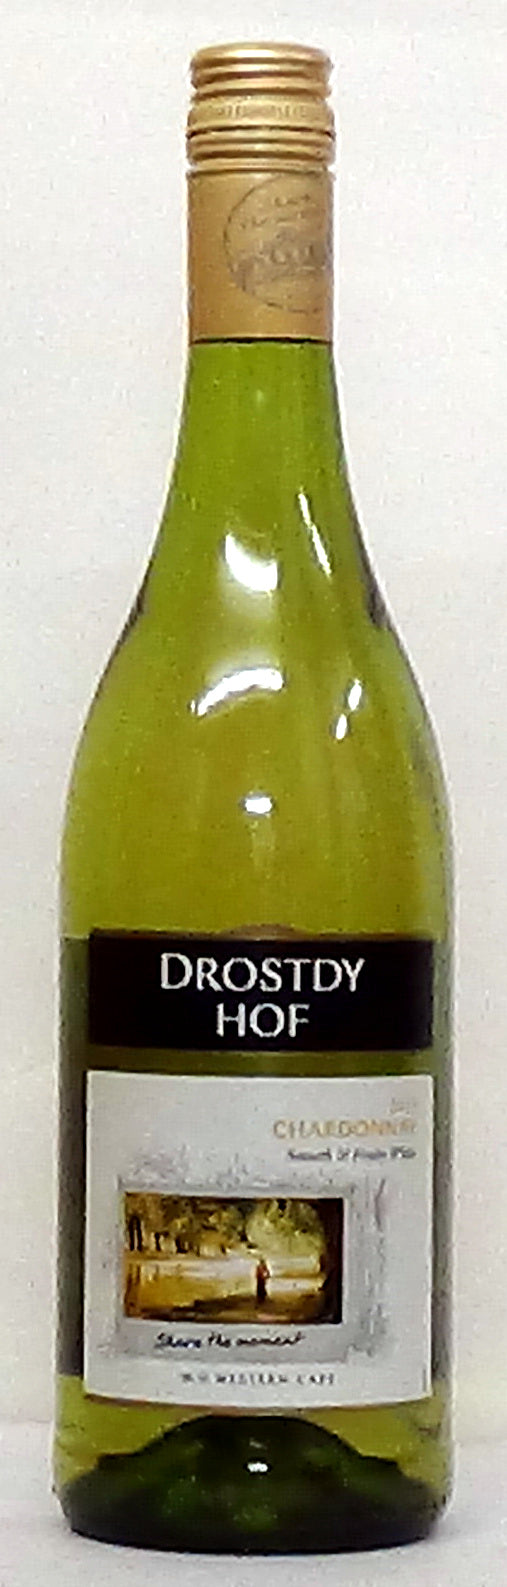 2019 Drostdy Hof Chardonnay Western Cape South Africa - White Wines - 